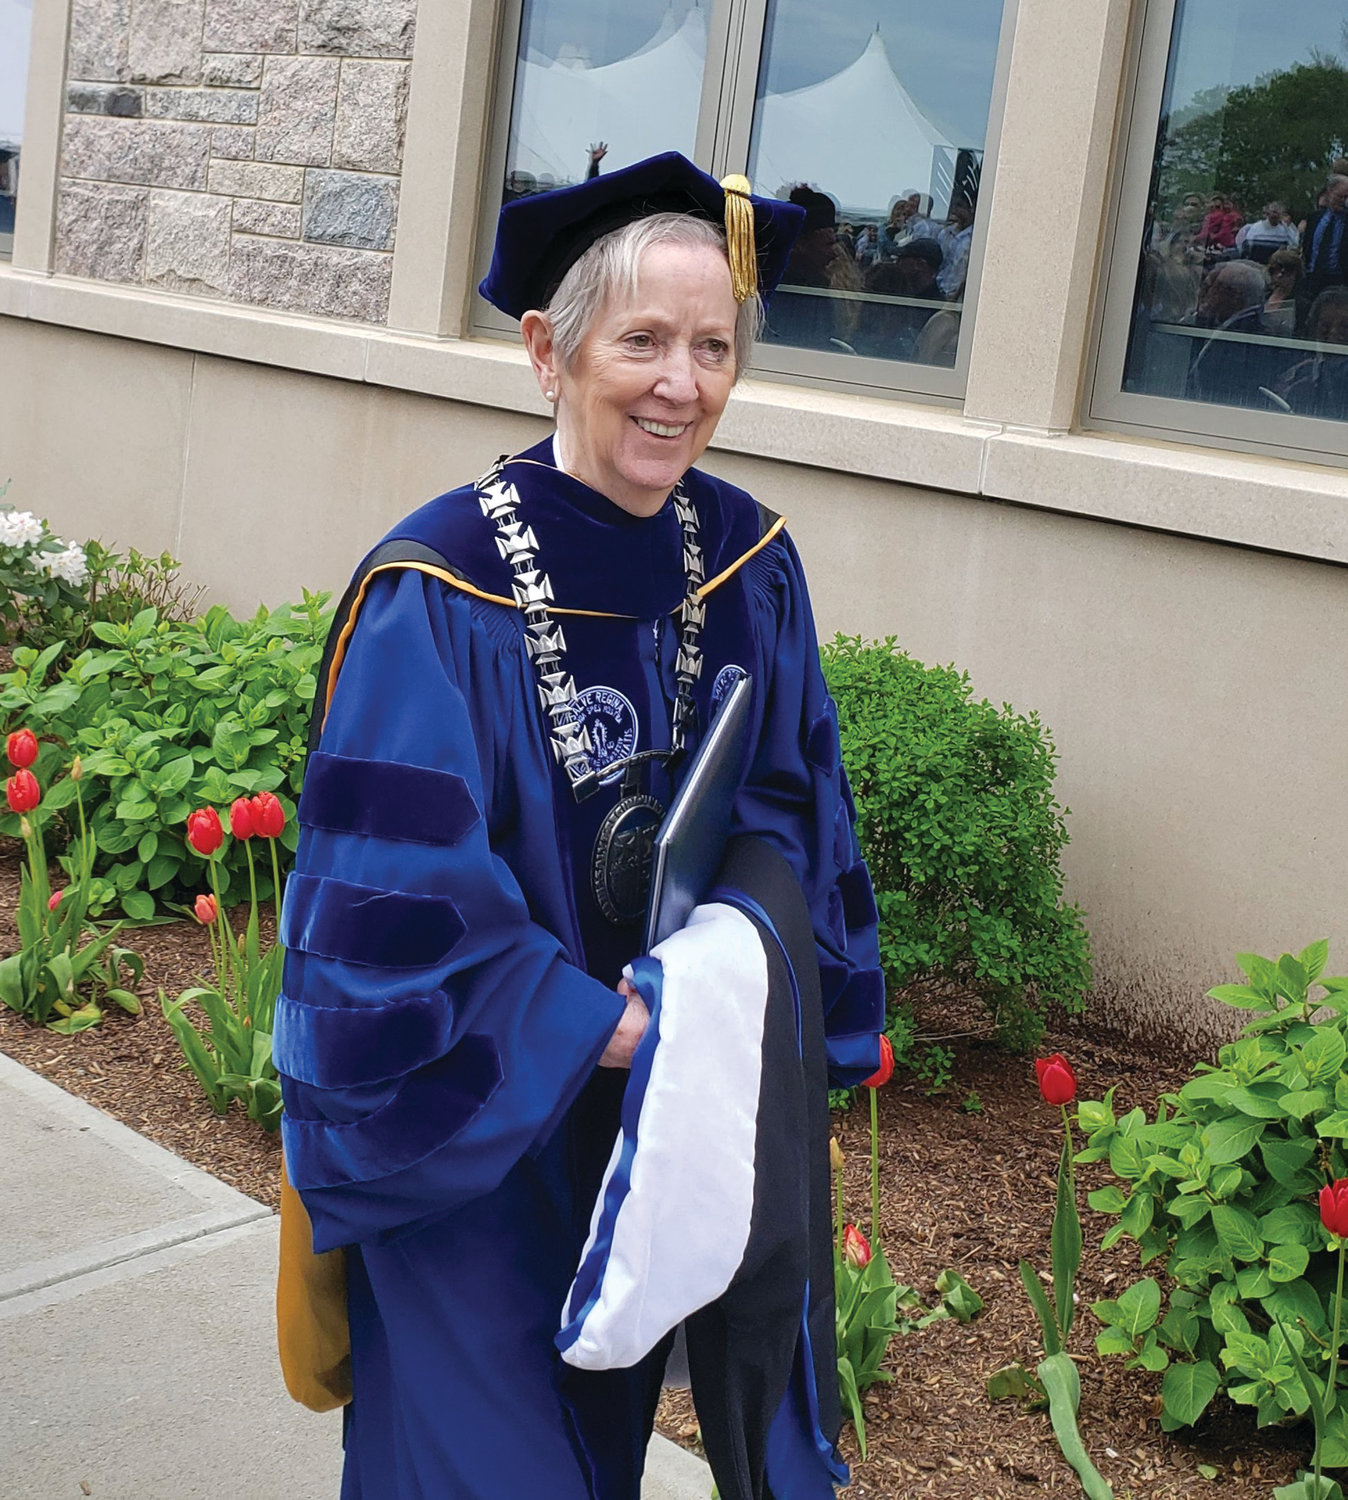 Salve Regina University President Sister Jane Gerety leads the procession, right, following the university’s 69th commencement ceremony on May 19, in which 505 graduates received bachelor’s degrees. Sister Gerety, who will be retiring in June after 10 years of leading the university, was the event’s keynote speaker.